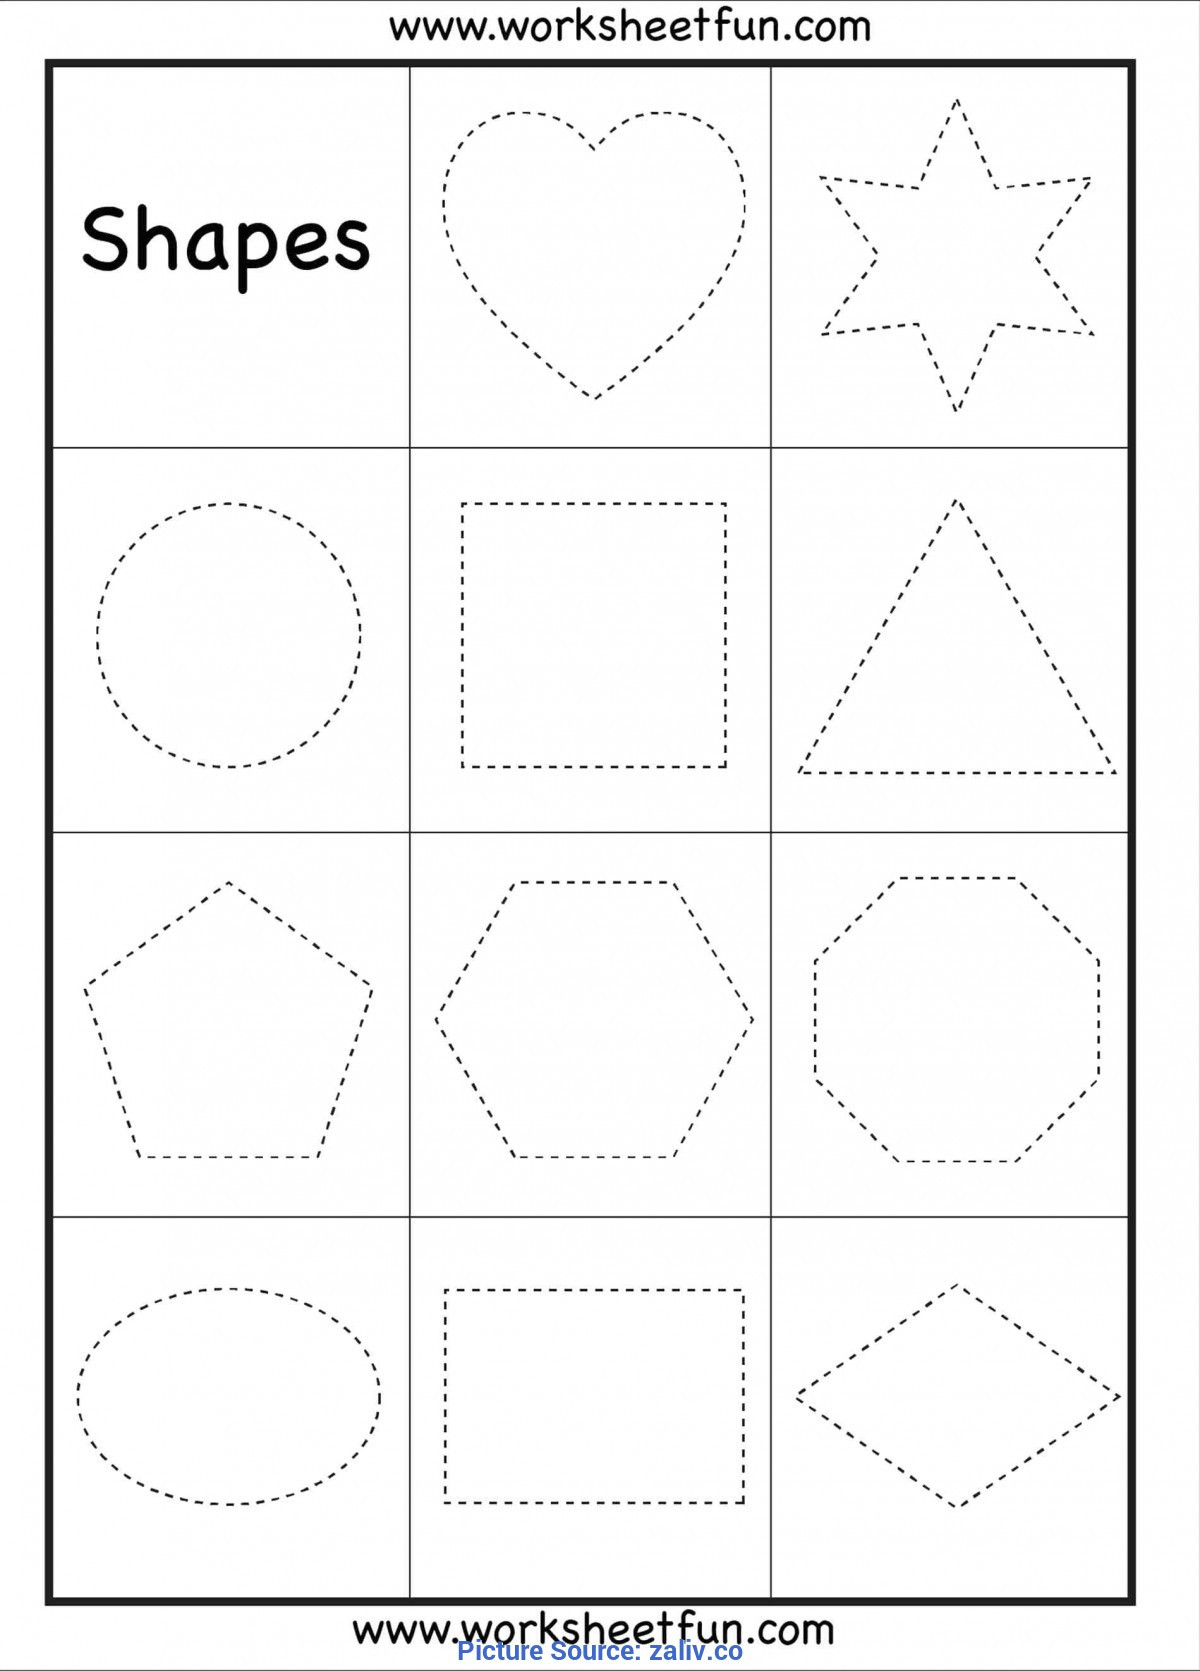 2 Dimensional Shapes Worksheet Typical Lesson Plan 2d Shapes Worksheet 2d 3d Shapes Worksh